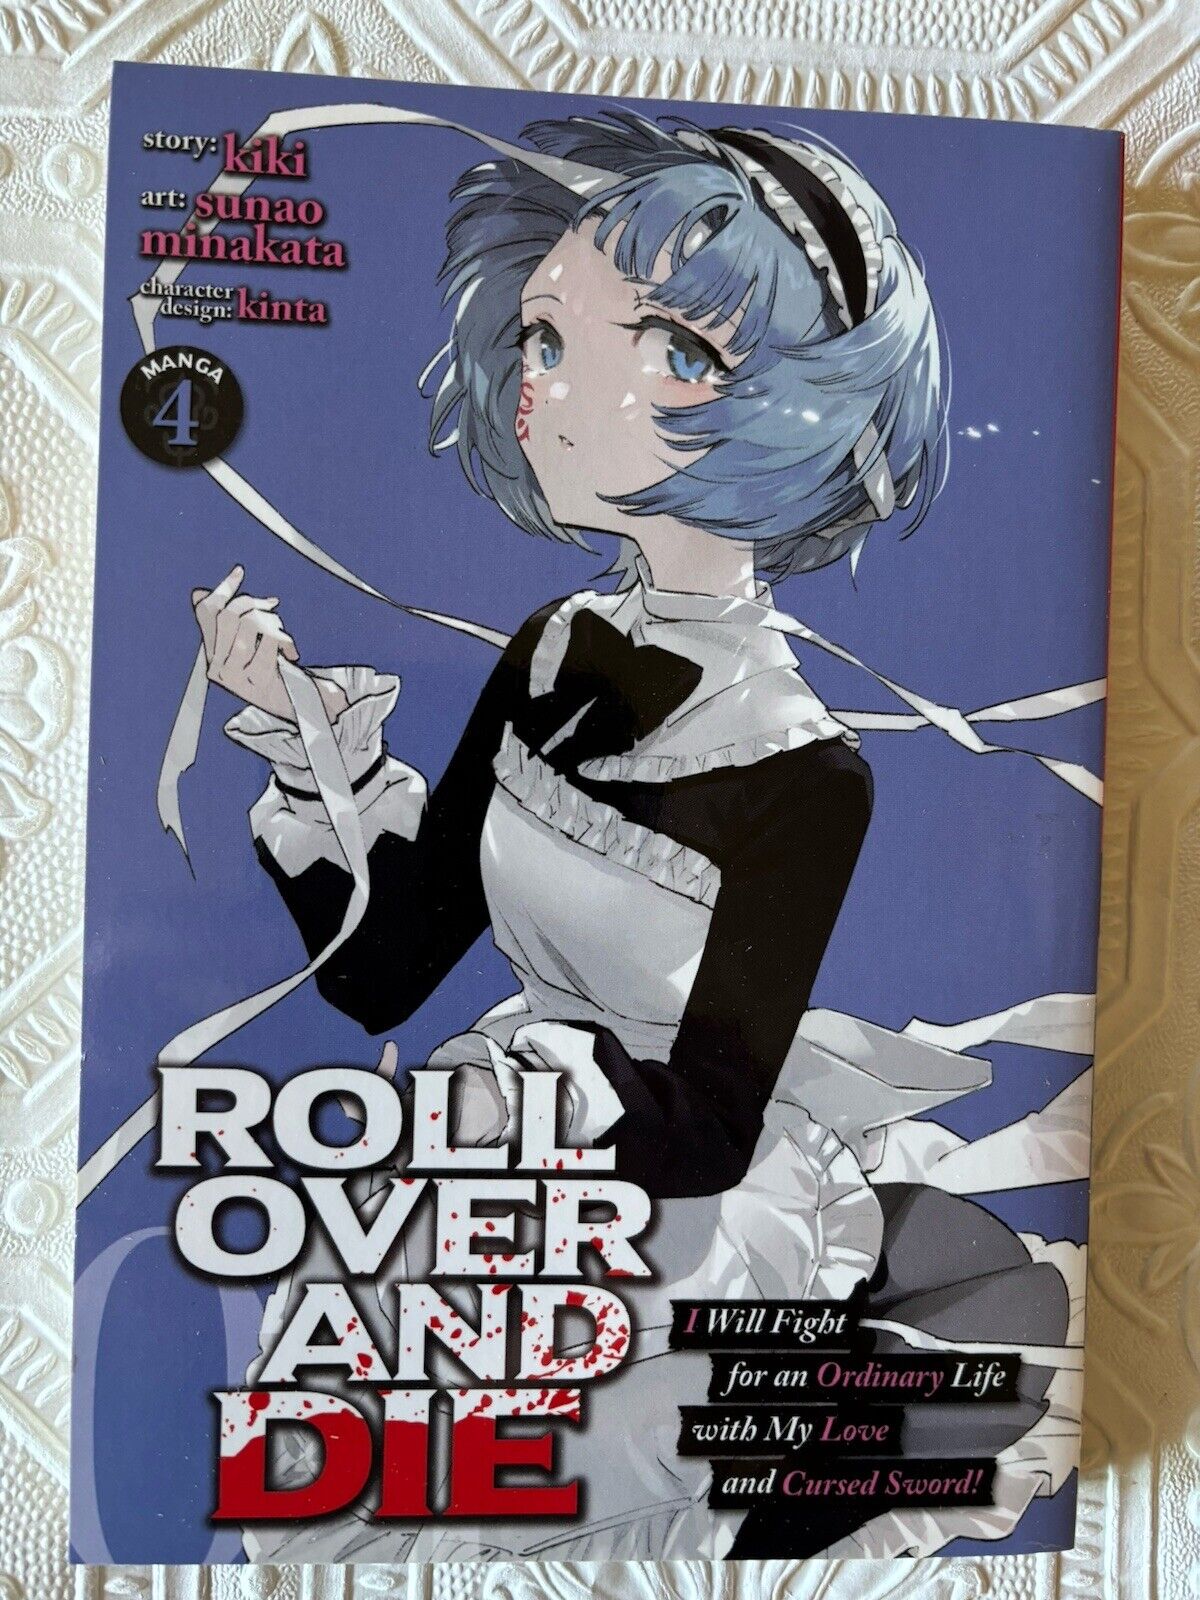 ROLL OVER AND DIE: I Will Fight for an Ordinary Life Vol 4 - New English Manga